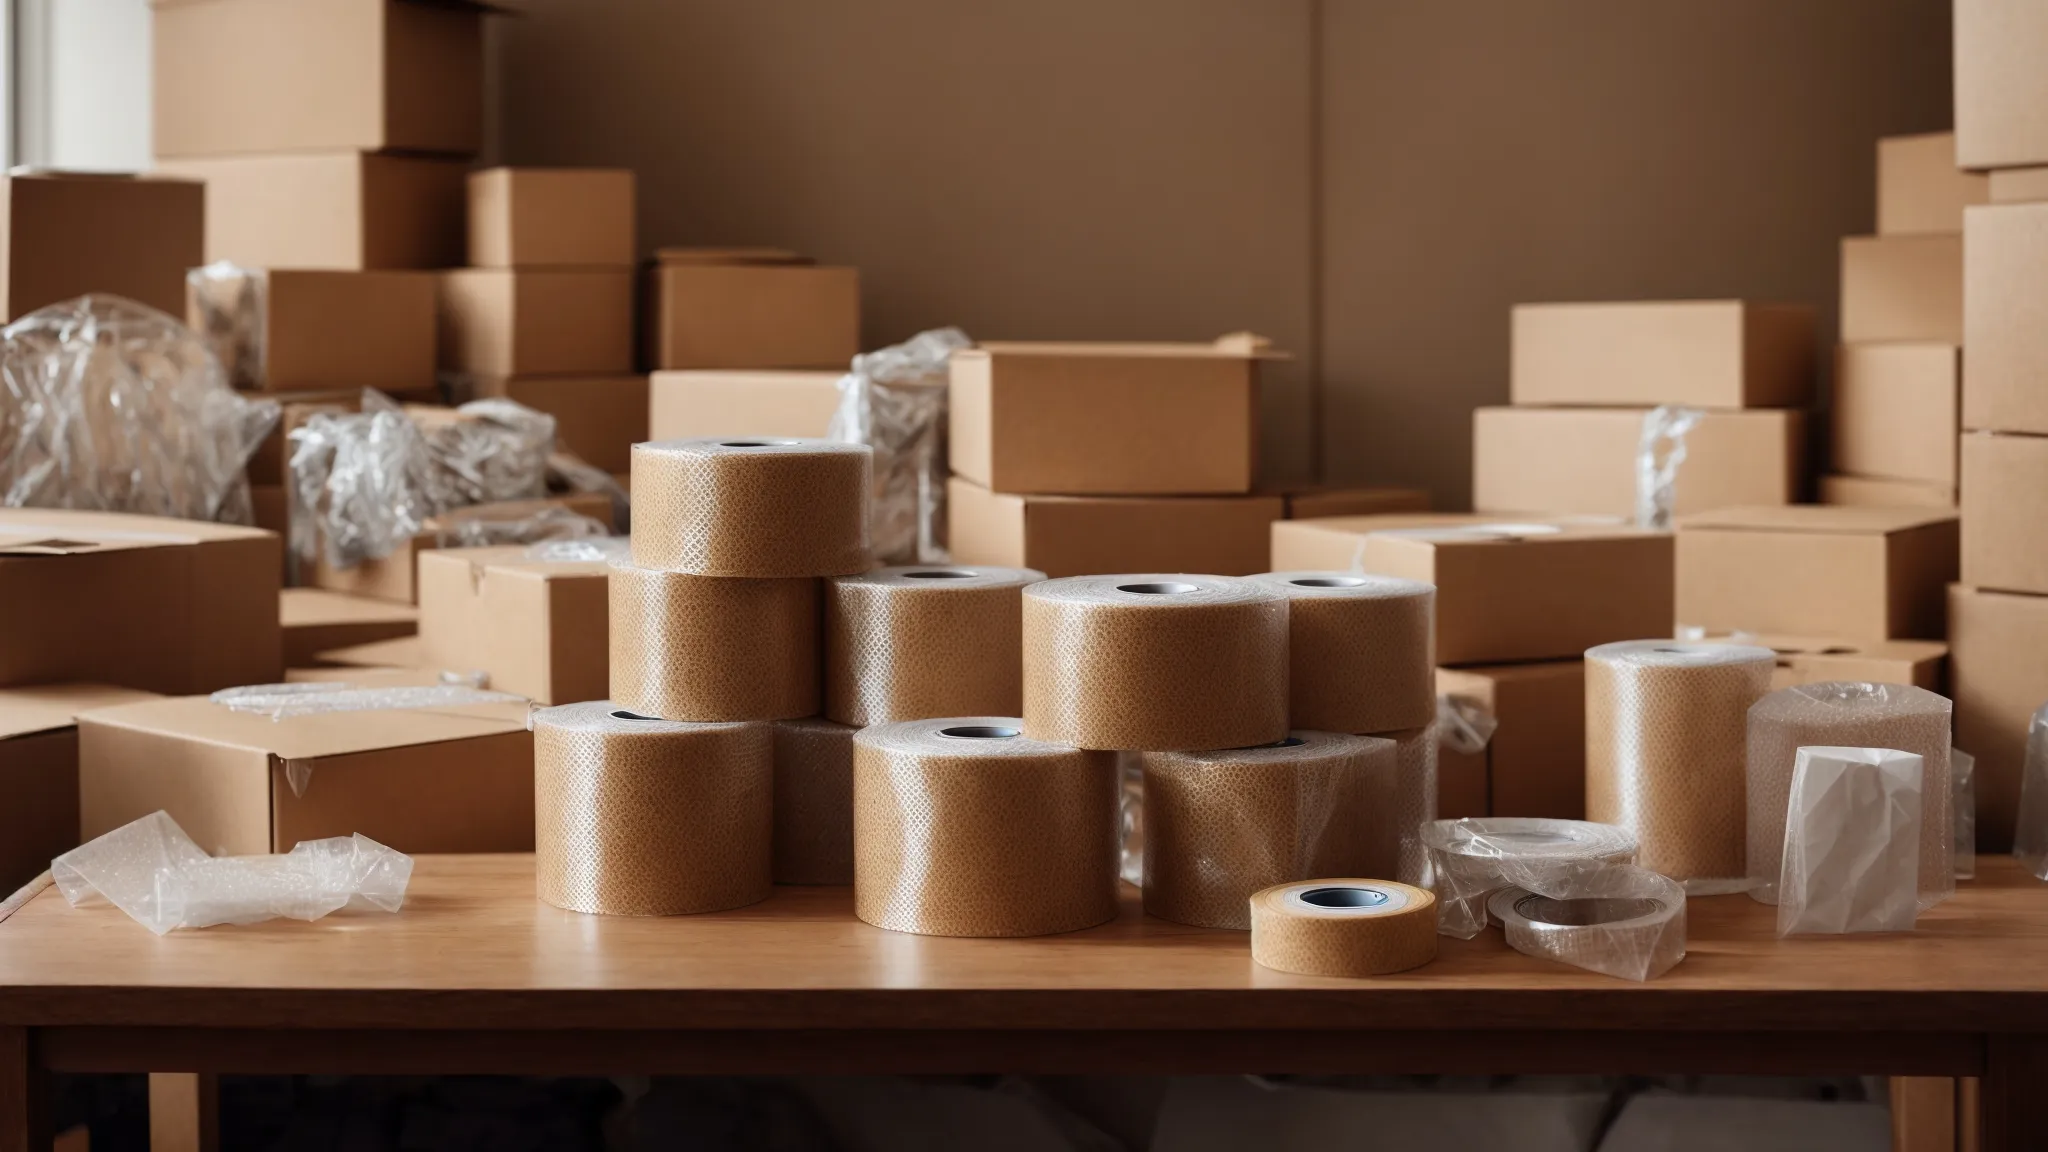 a neatly organized array of cardboard boxes, rolls of bubble wrap, and a tape dispenser on a wooden table.